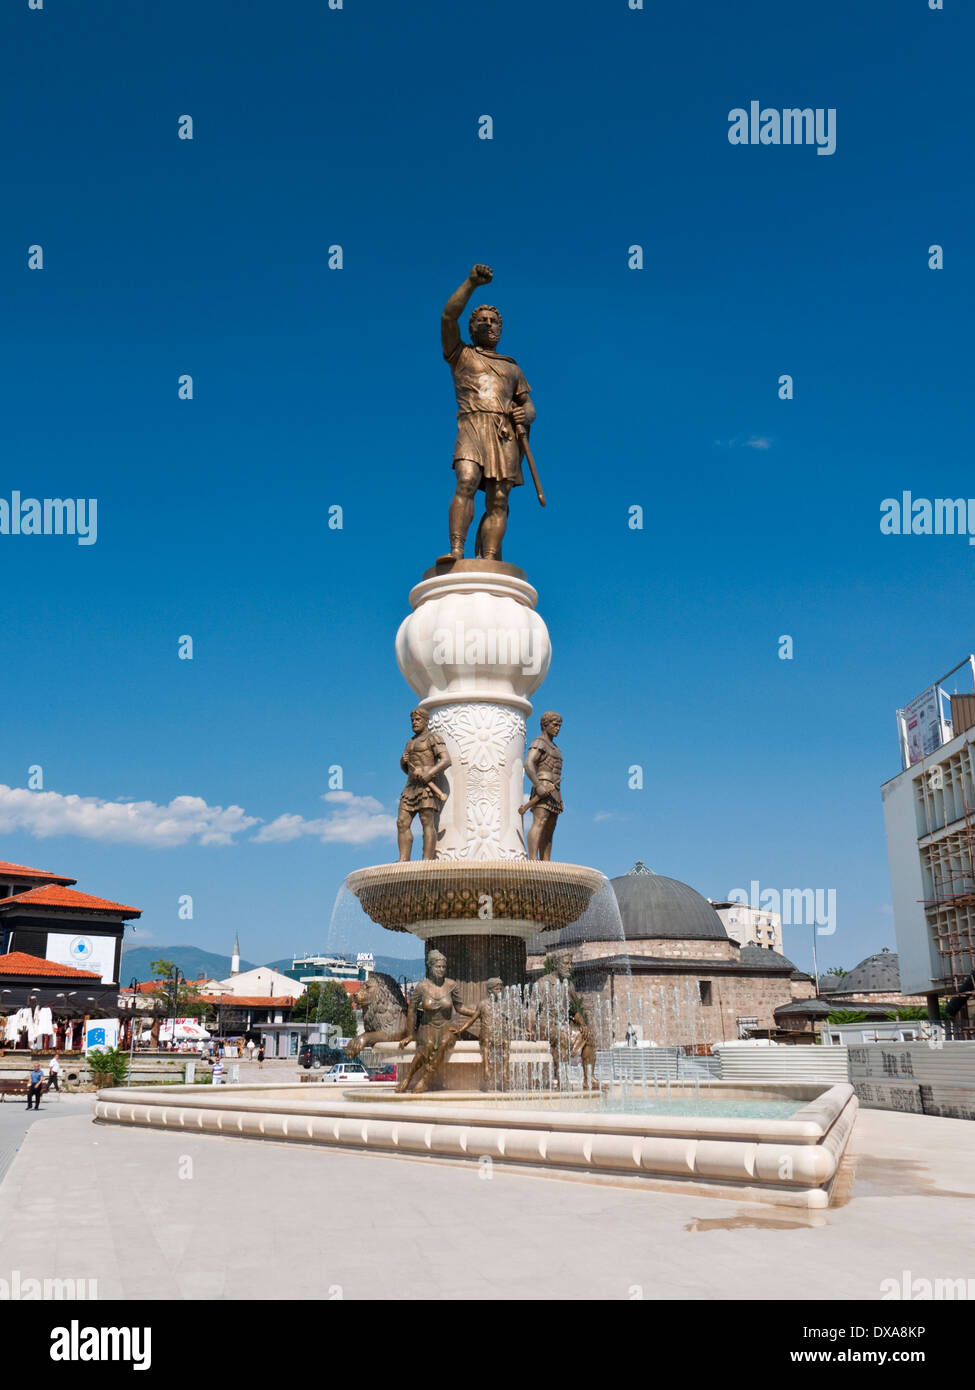 Statue of Philip II of Macedonia and fountain, erected as part of the  "Skopje 2014" project, Skopje, Macedonia Stock Photo - Alamy